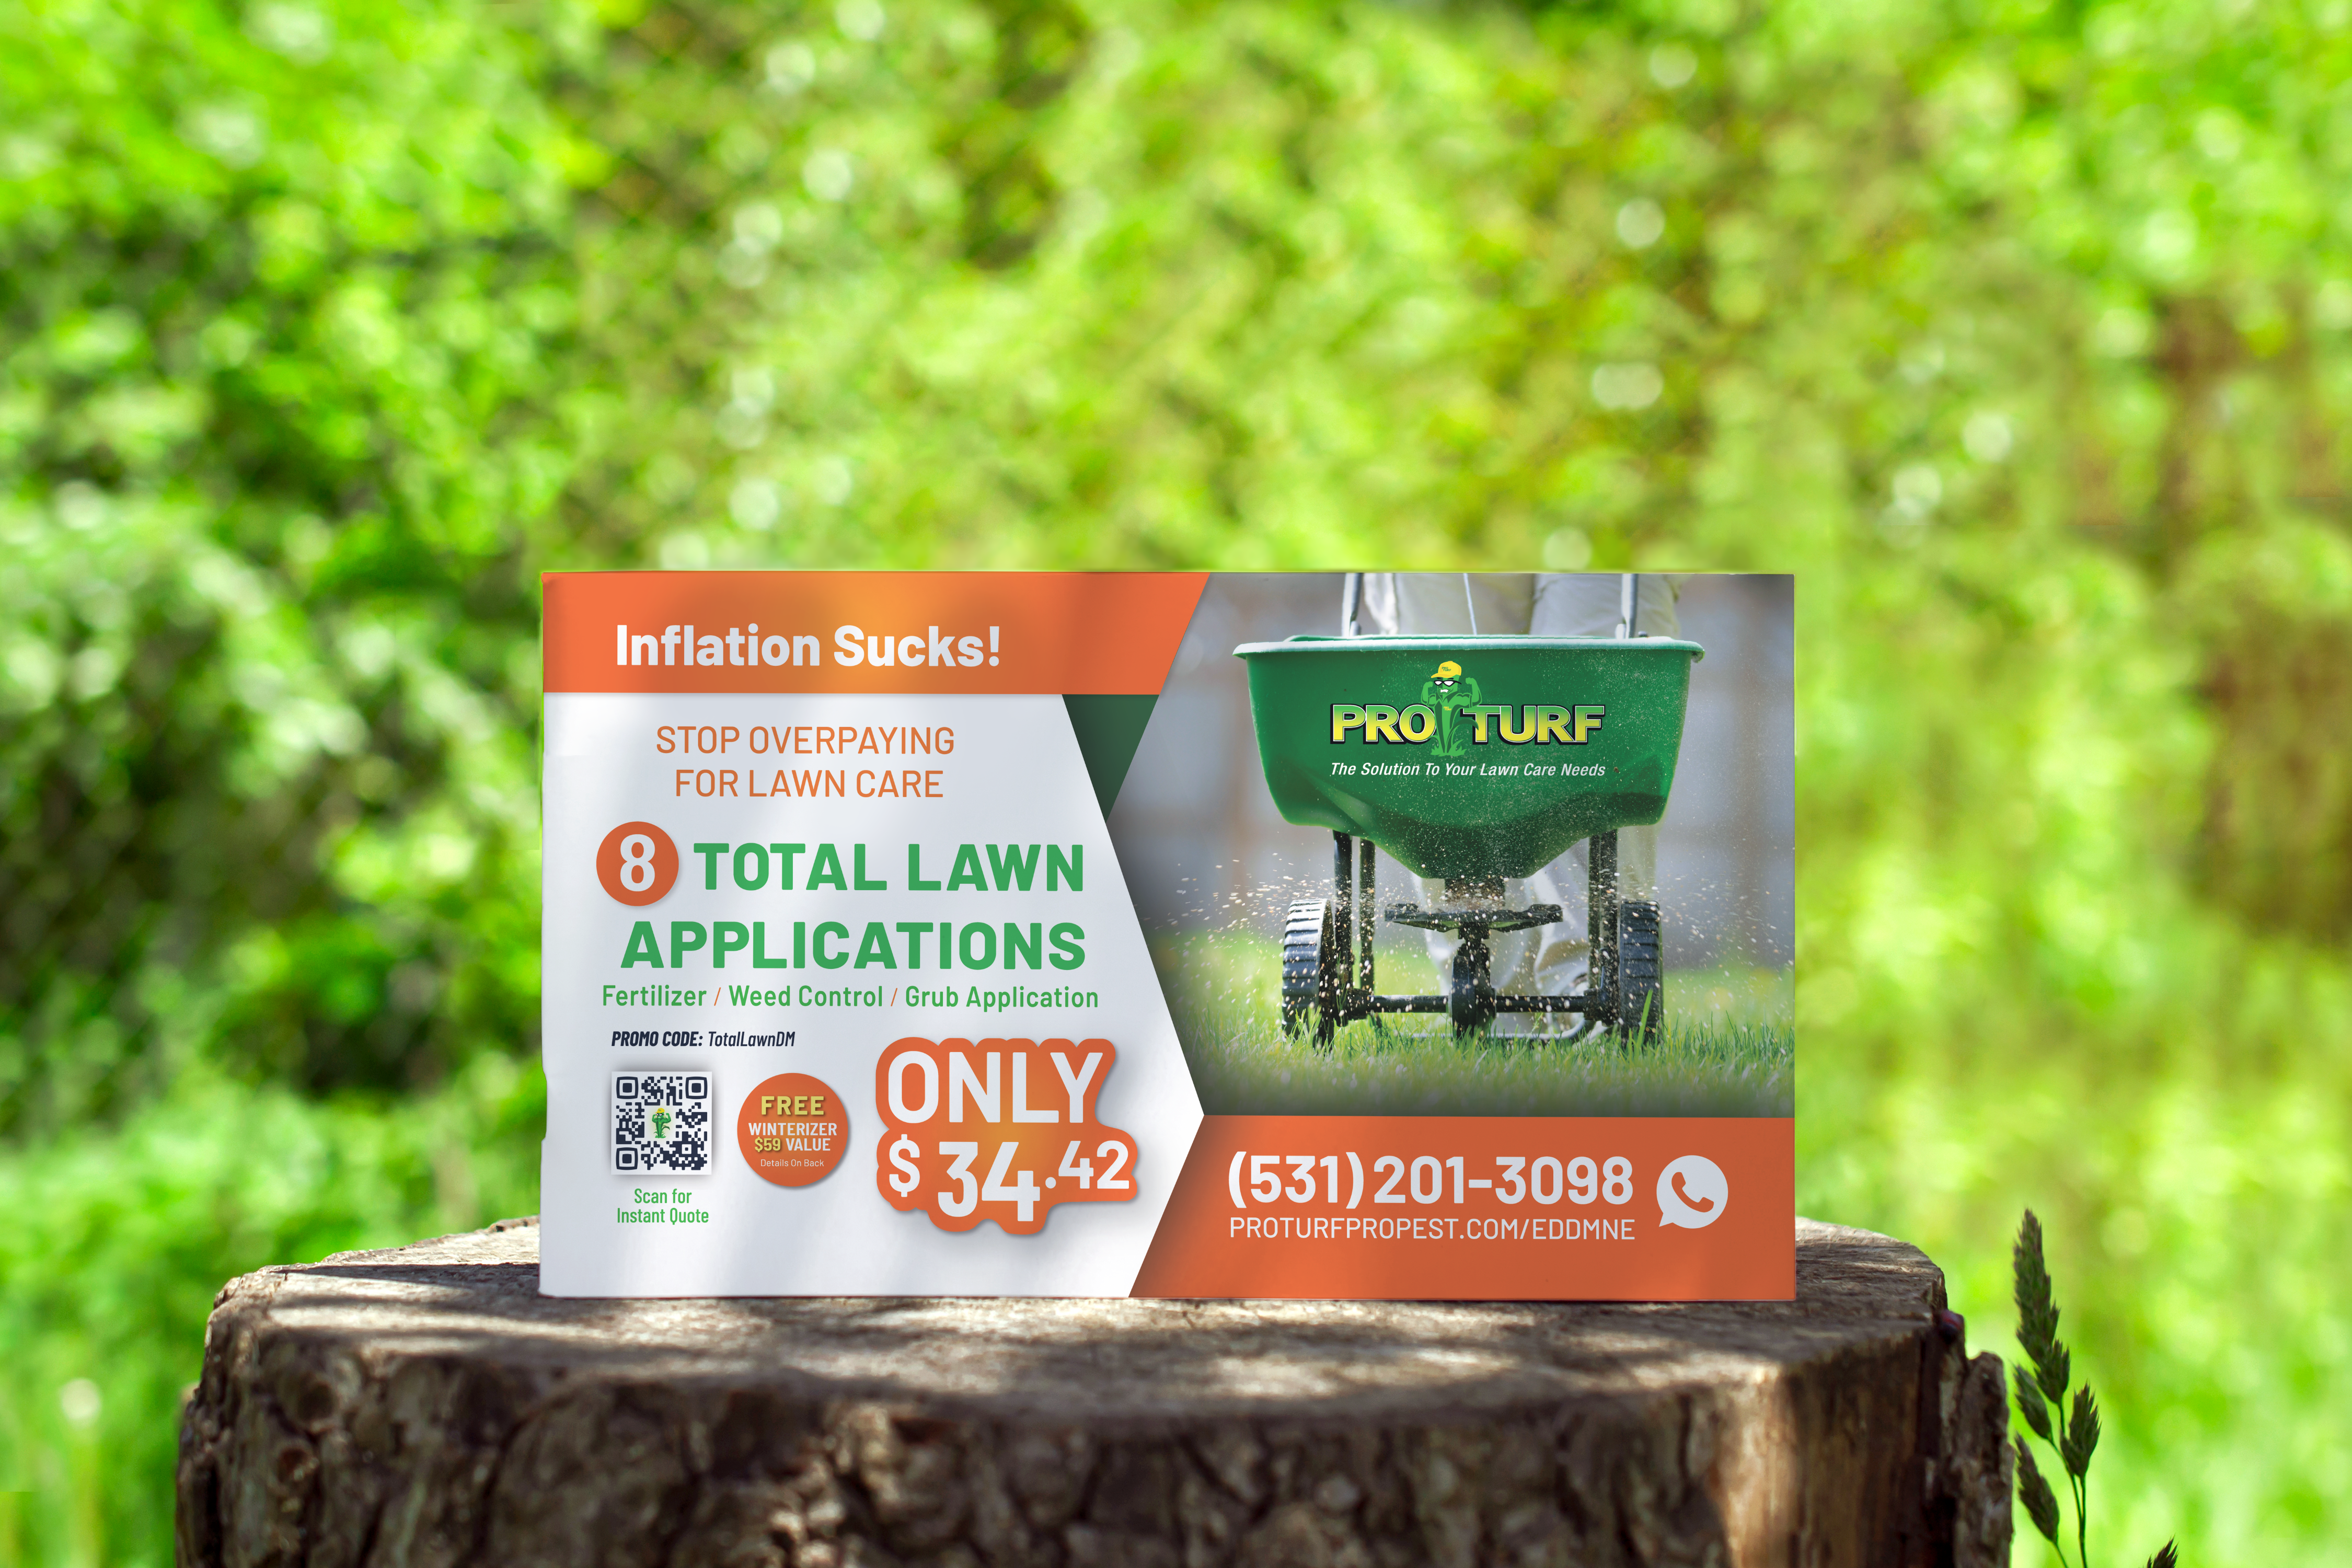 Postcard piece designed by Doss Designs strategic marketing services for Pro Turf Lawn Service. This postcard is sitting on a tree stump outside on nature showcasing the design elements of the card.